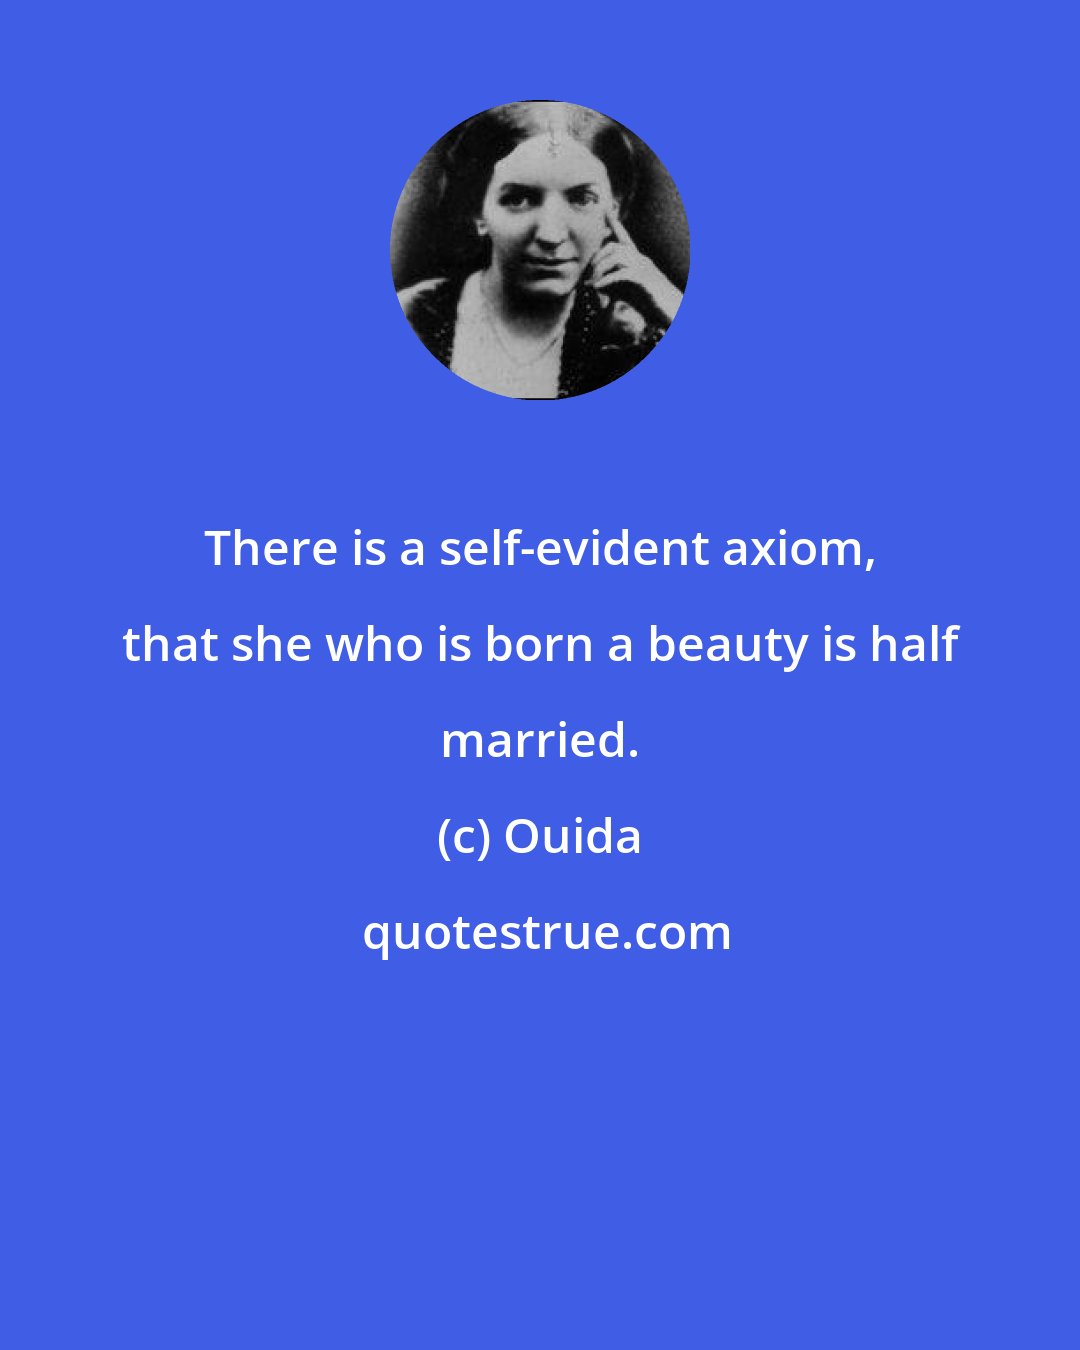 Ouida: There is a self-evident axiom, that she who is born a beauty is half married.